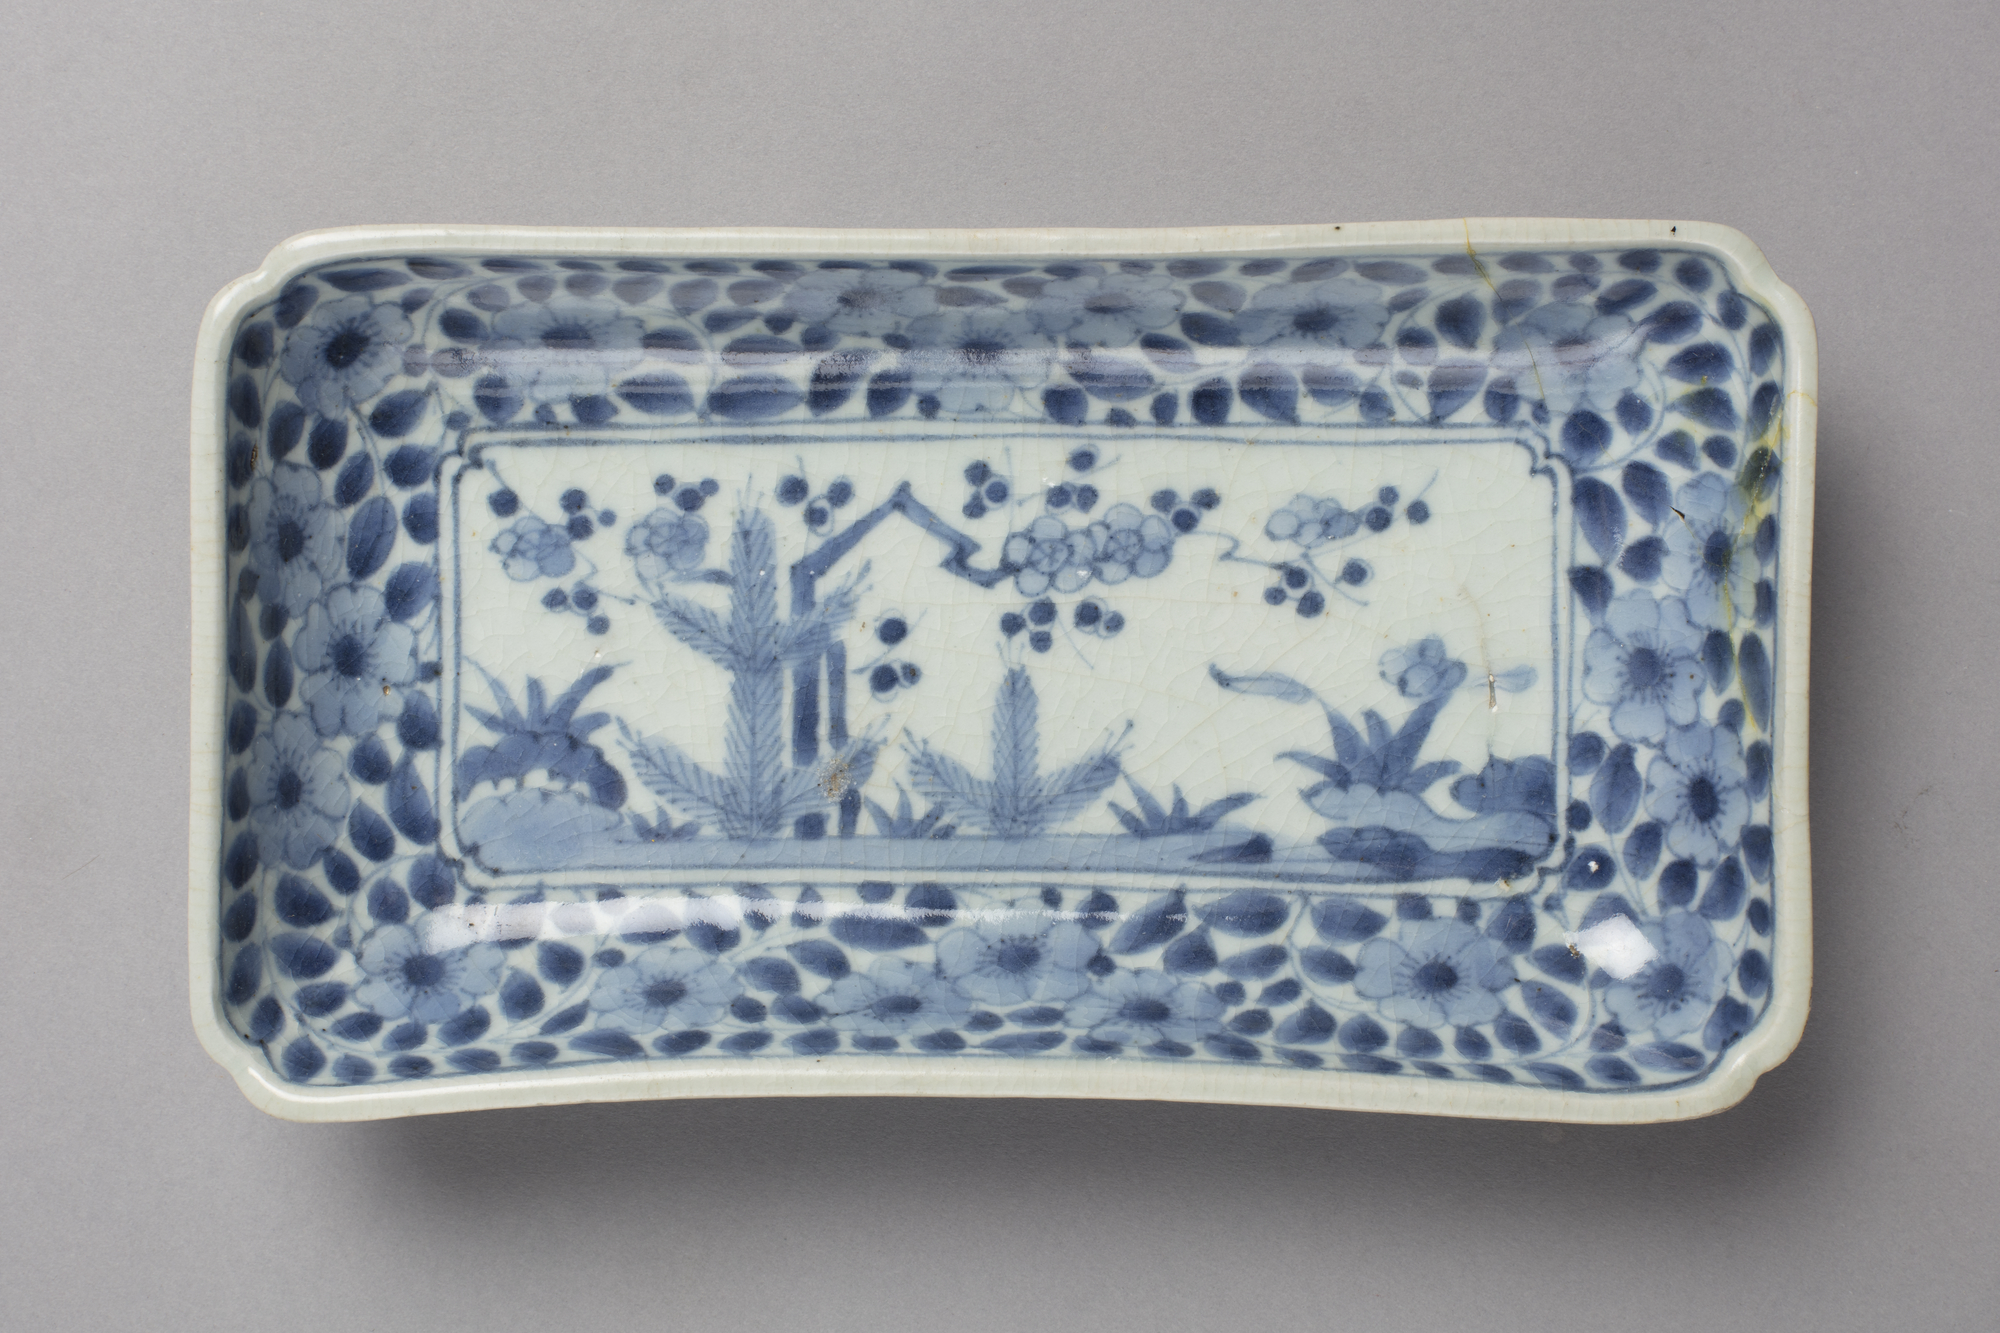 Rectangular dish with young pine and plum blossom design in blue on white